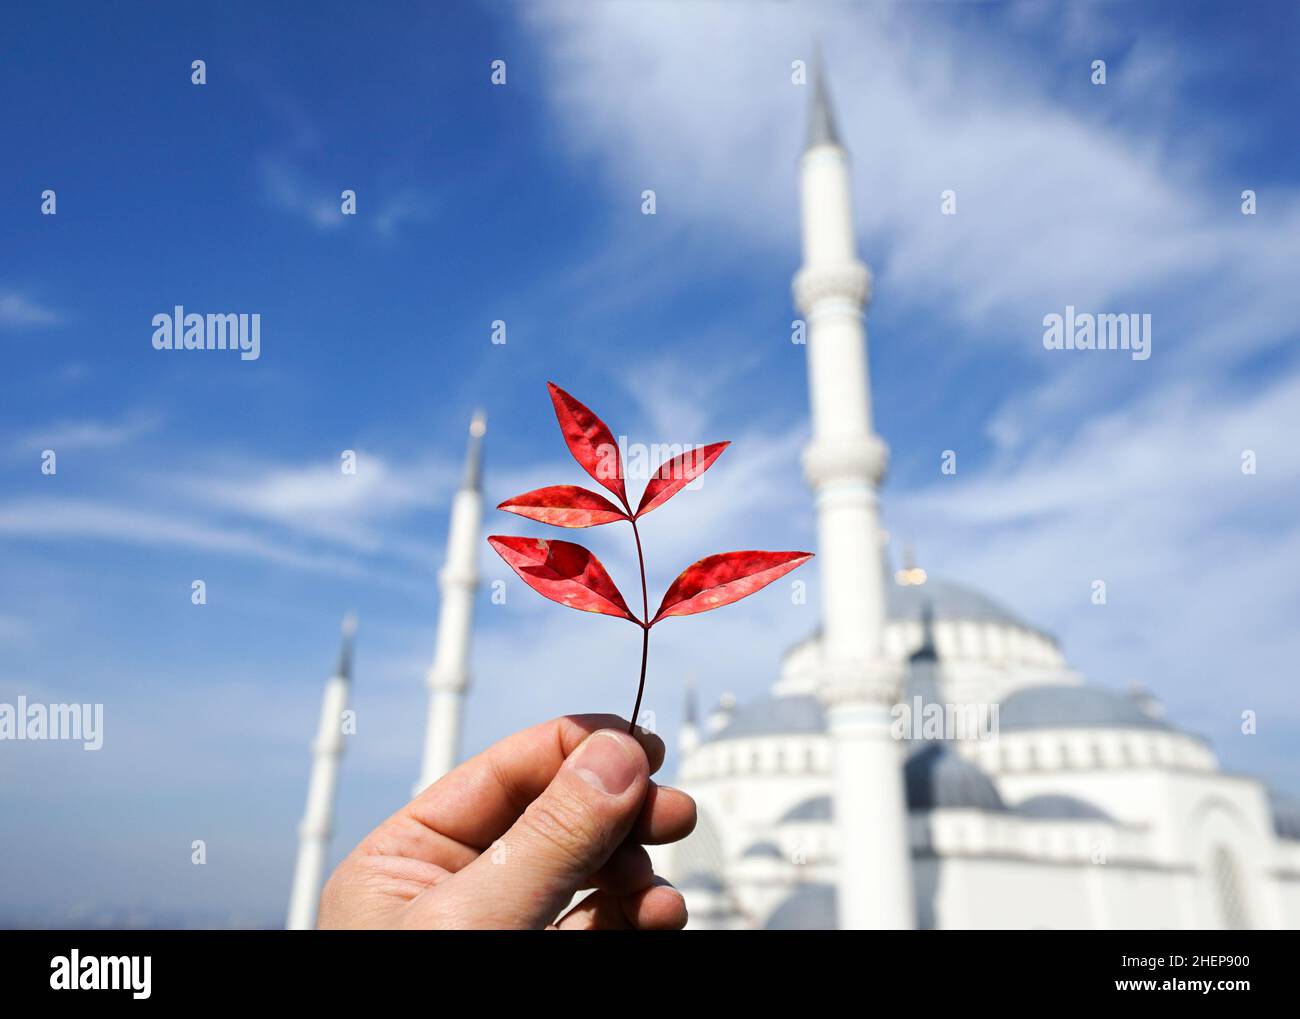 A man’s hand holding a red leaf against the cloudy blue sky with Istanbul Camlica mosque in the background. Stock Photo